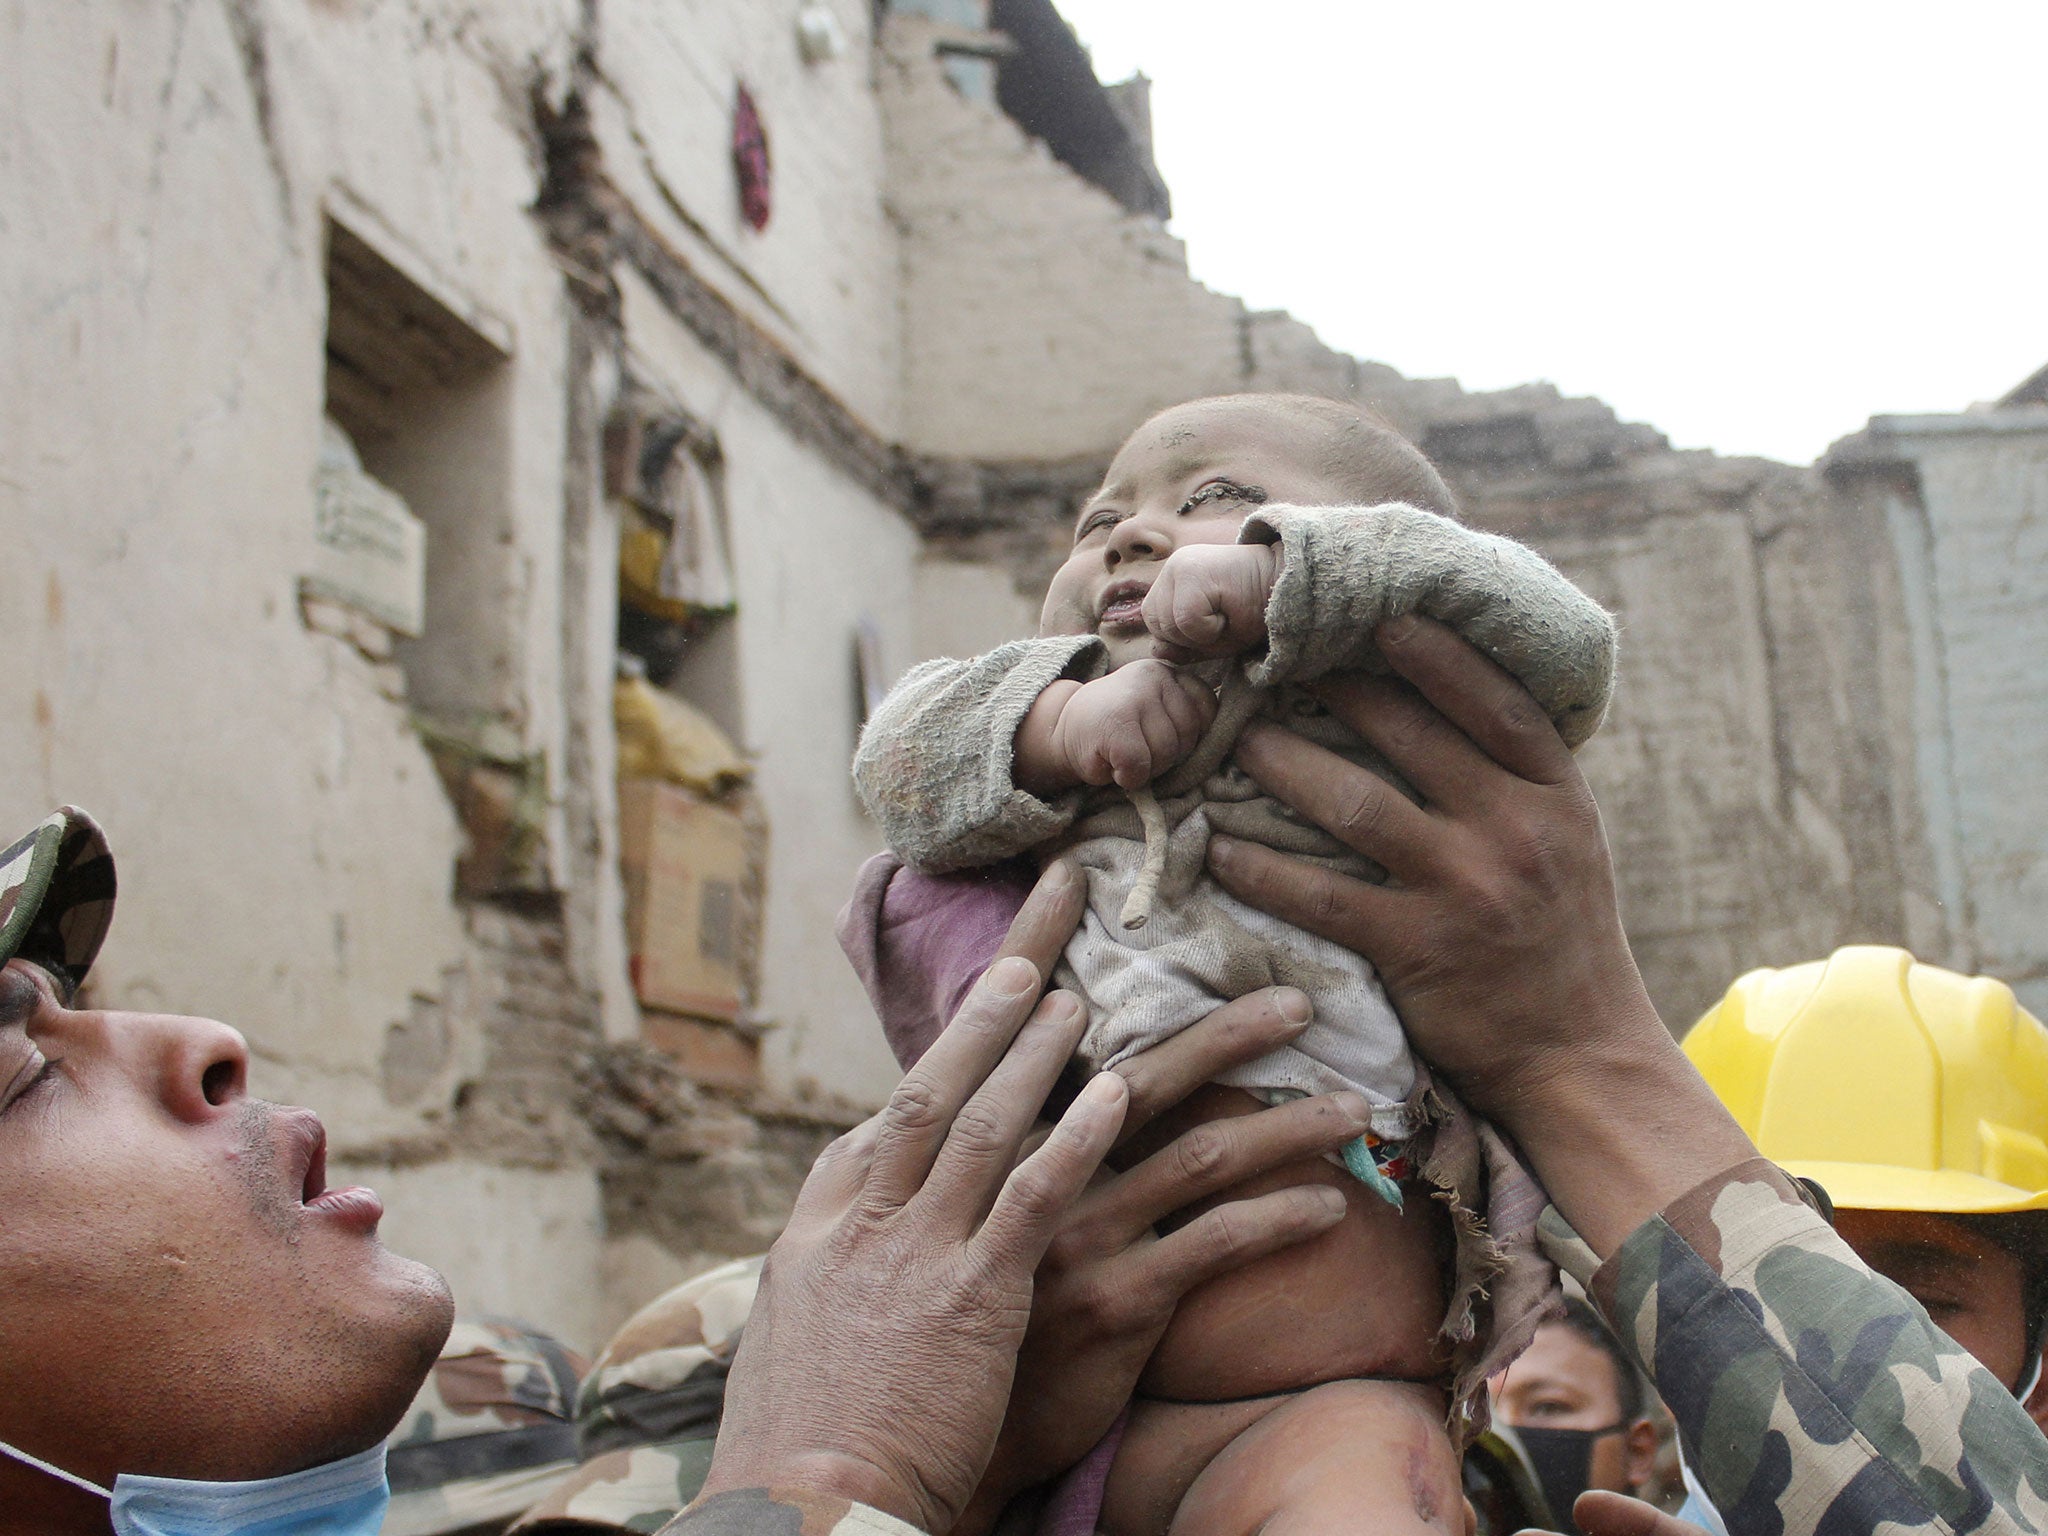 Four-month-old baby boy Sonit Awal is held up by Nepalese Army soldiers after being rescued from the rubble of his house in Bhaktapur, Nepal